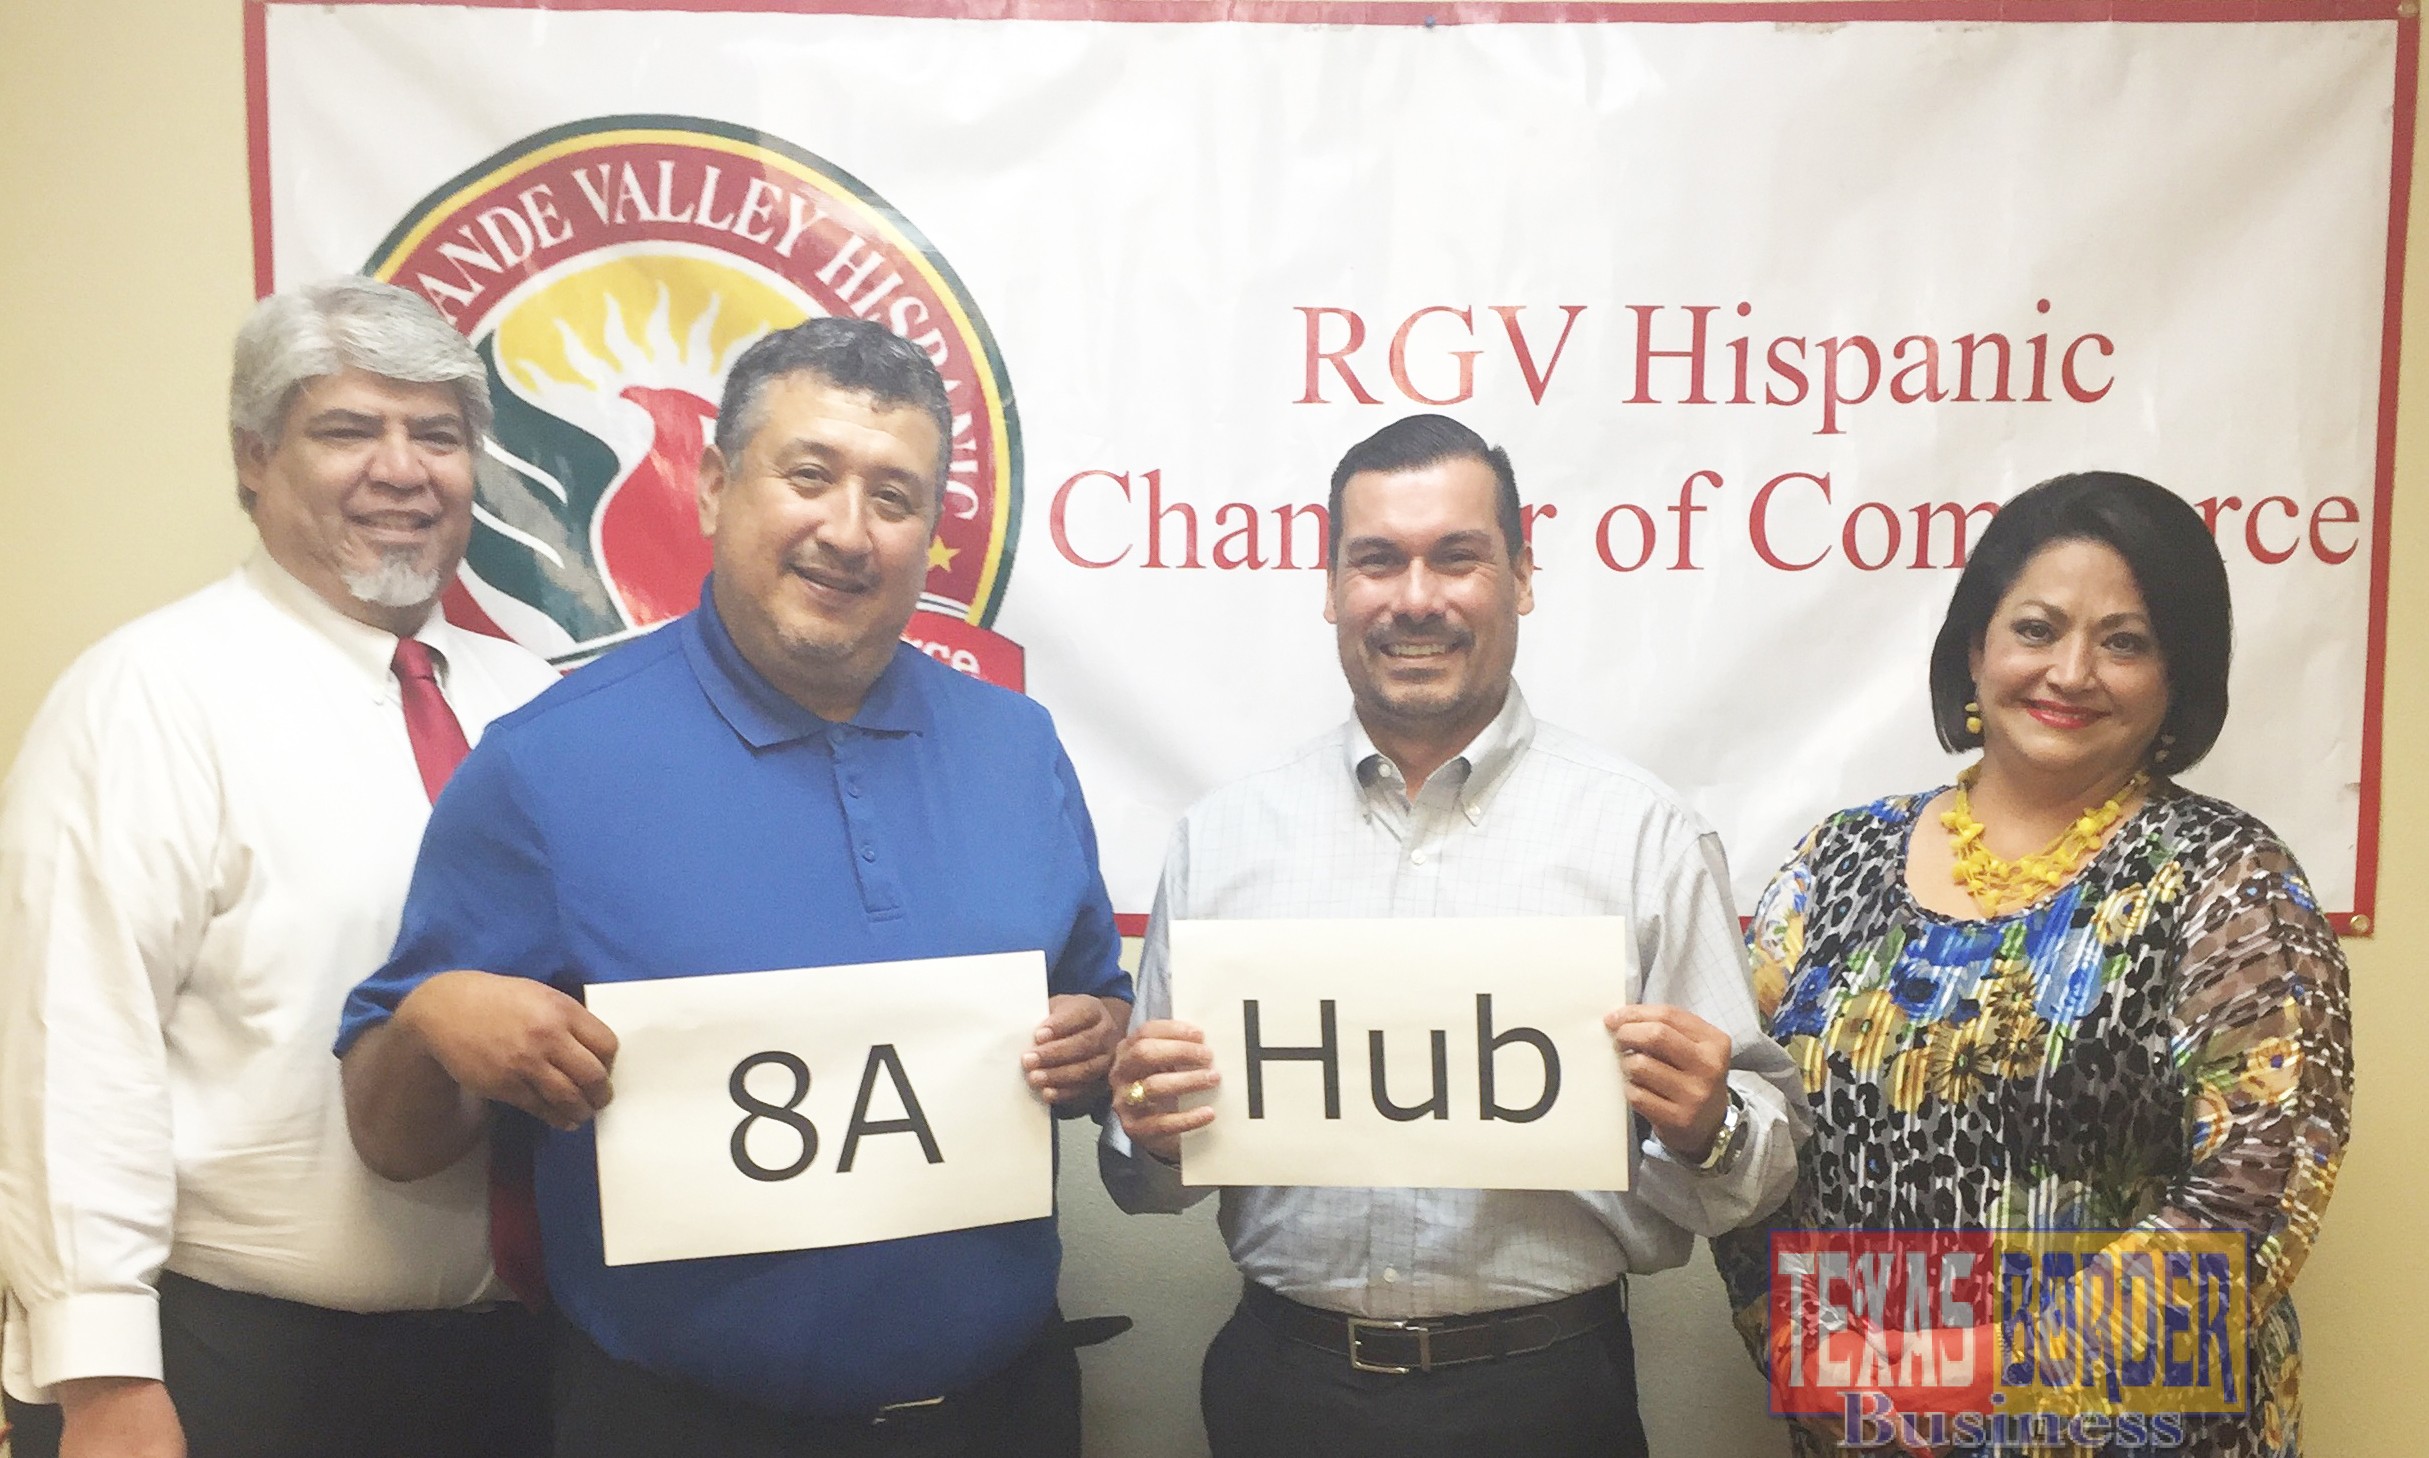 Shown meeting to discuss the 2 workshops are left to right:  Hector Landez, PTAC Director; Gilbert Solis, SBA; Orlando Castaneda, PTAC and Cynthia M. Sakulenzki, RGVHCC.